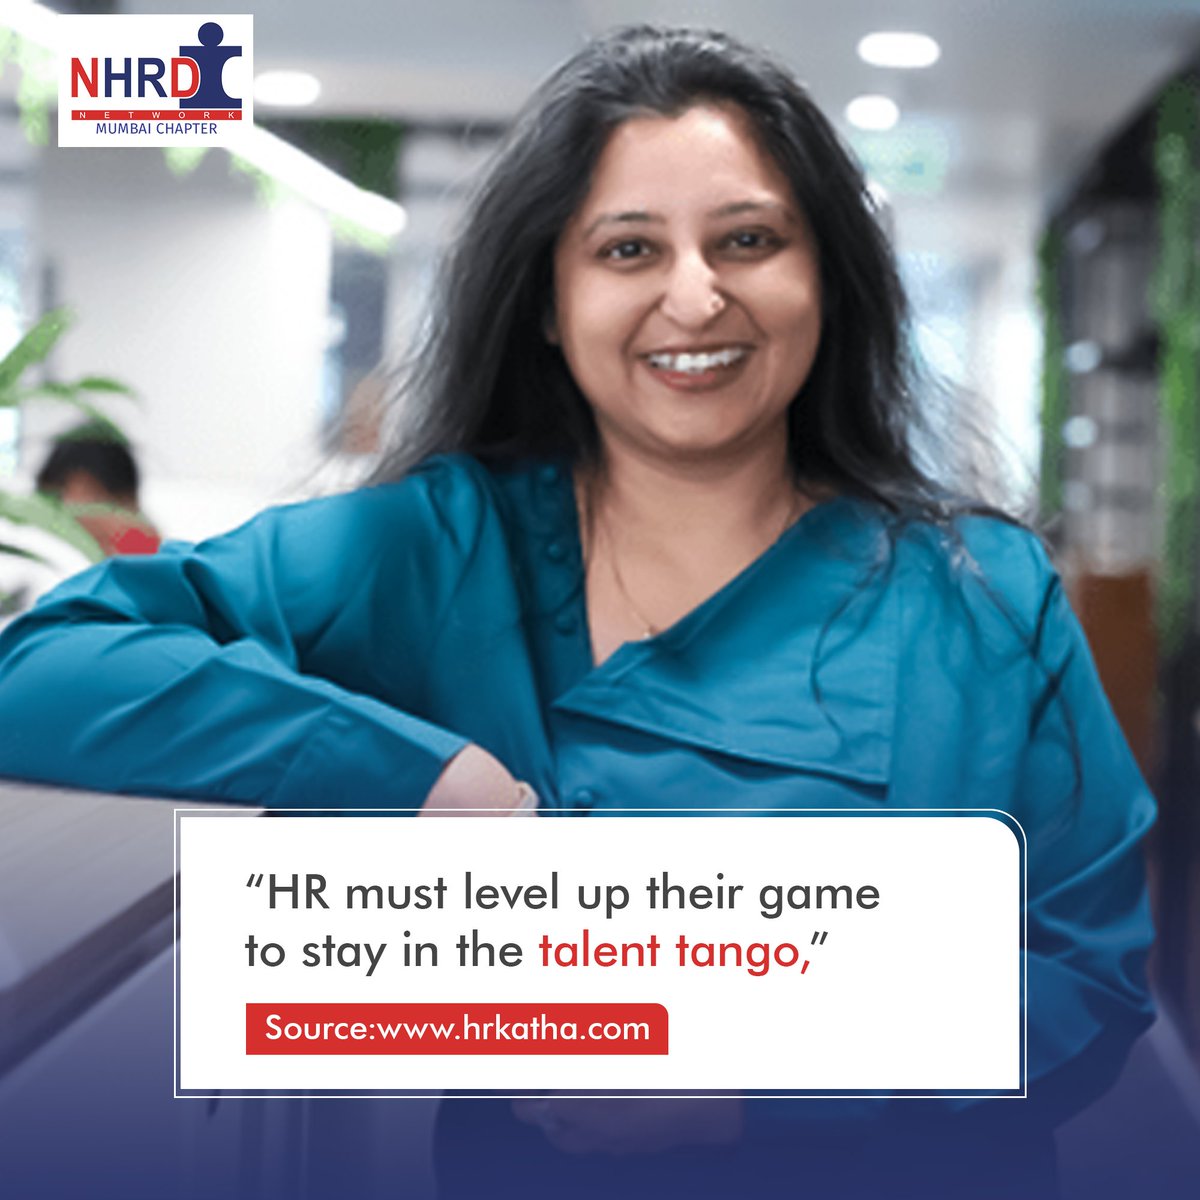 Leveling up is a assured way to stay on top of the game 👏🏼 Link : bit.ly/49kVFPp #NHRDN #HR #HRNews #News #LatestNews #CentralGovernment #Government #NHRDNMumbai